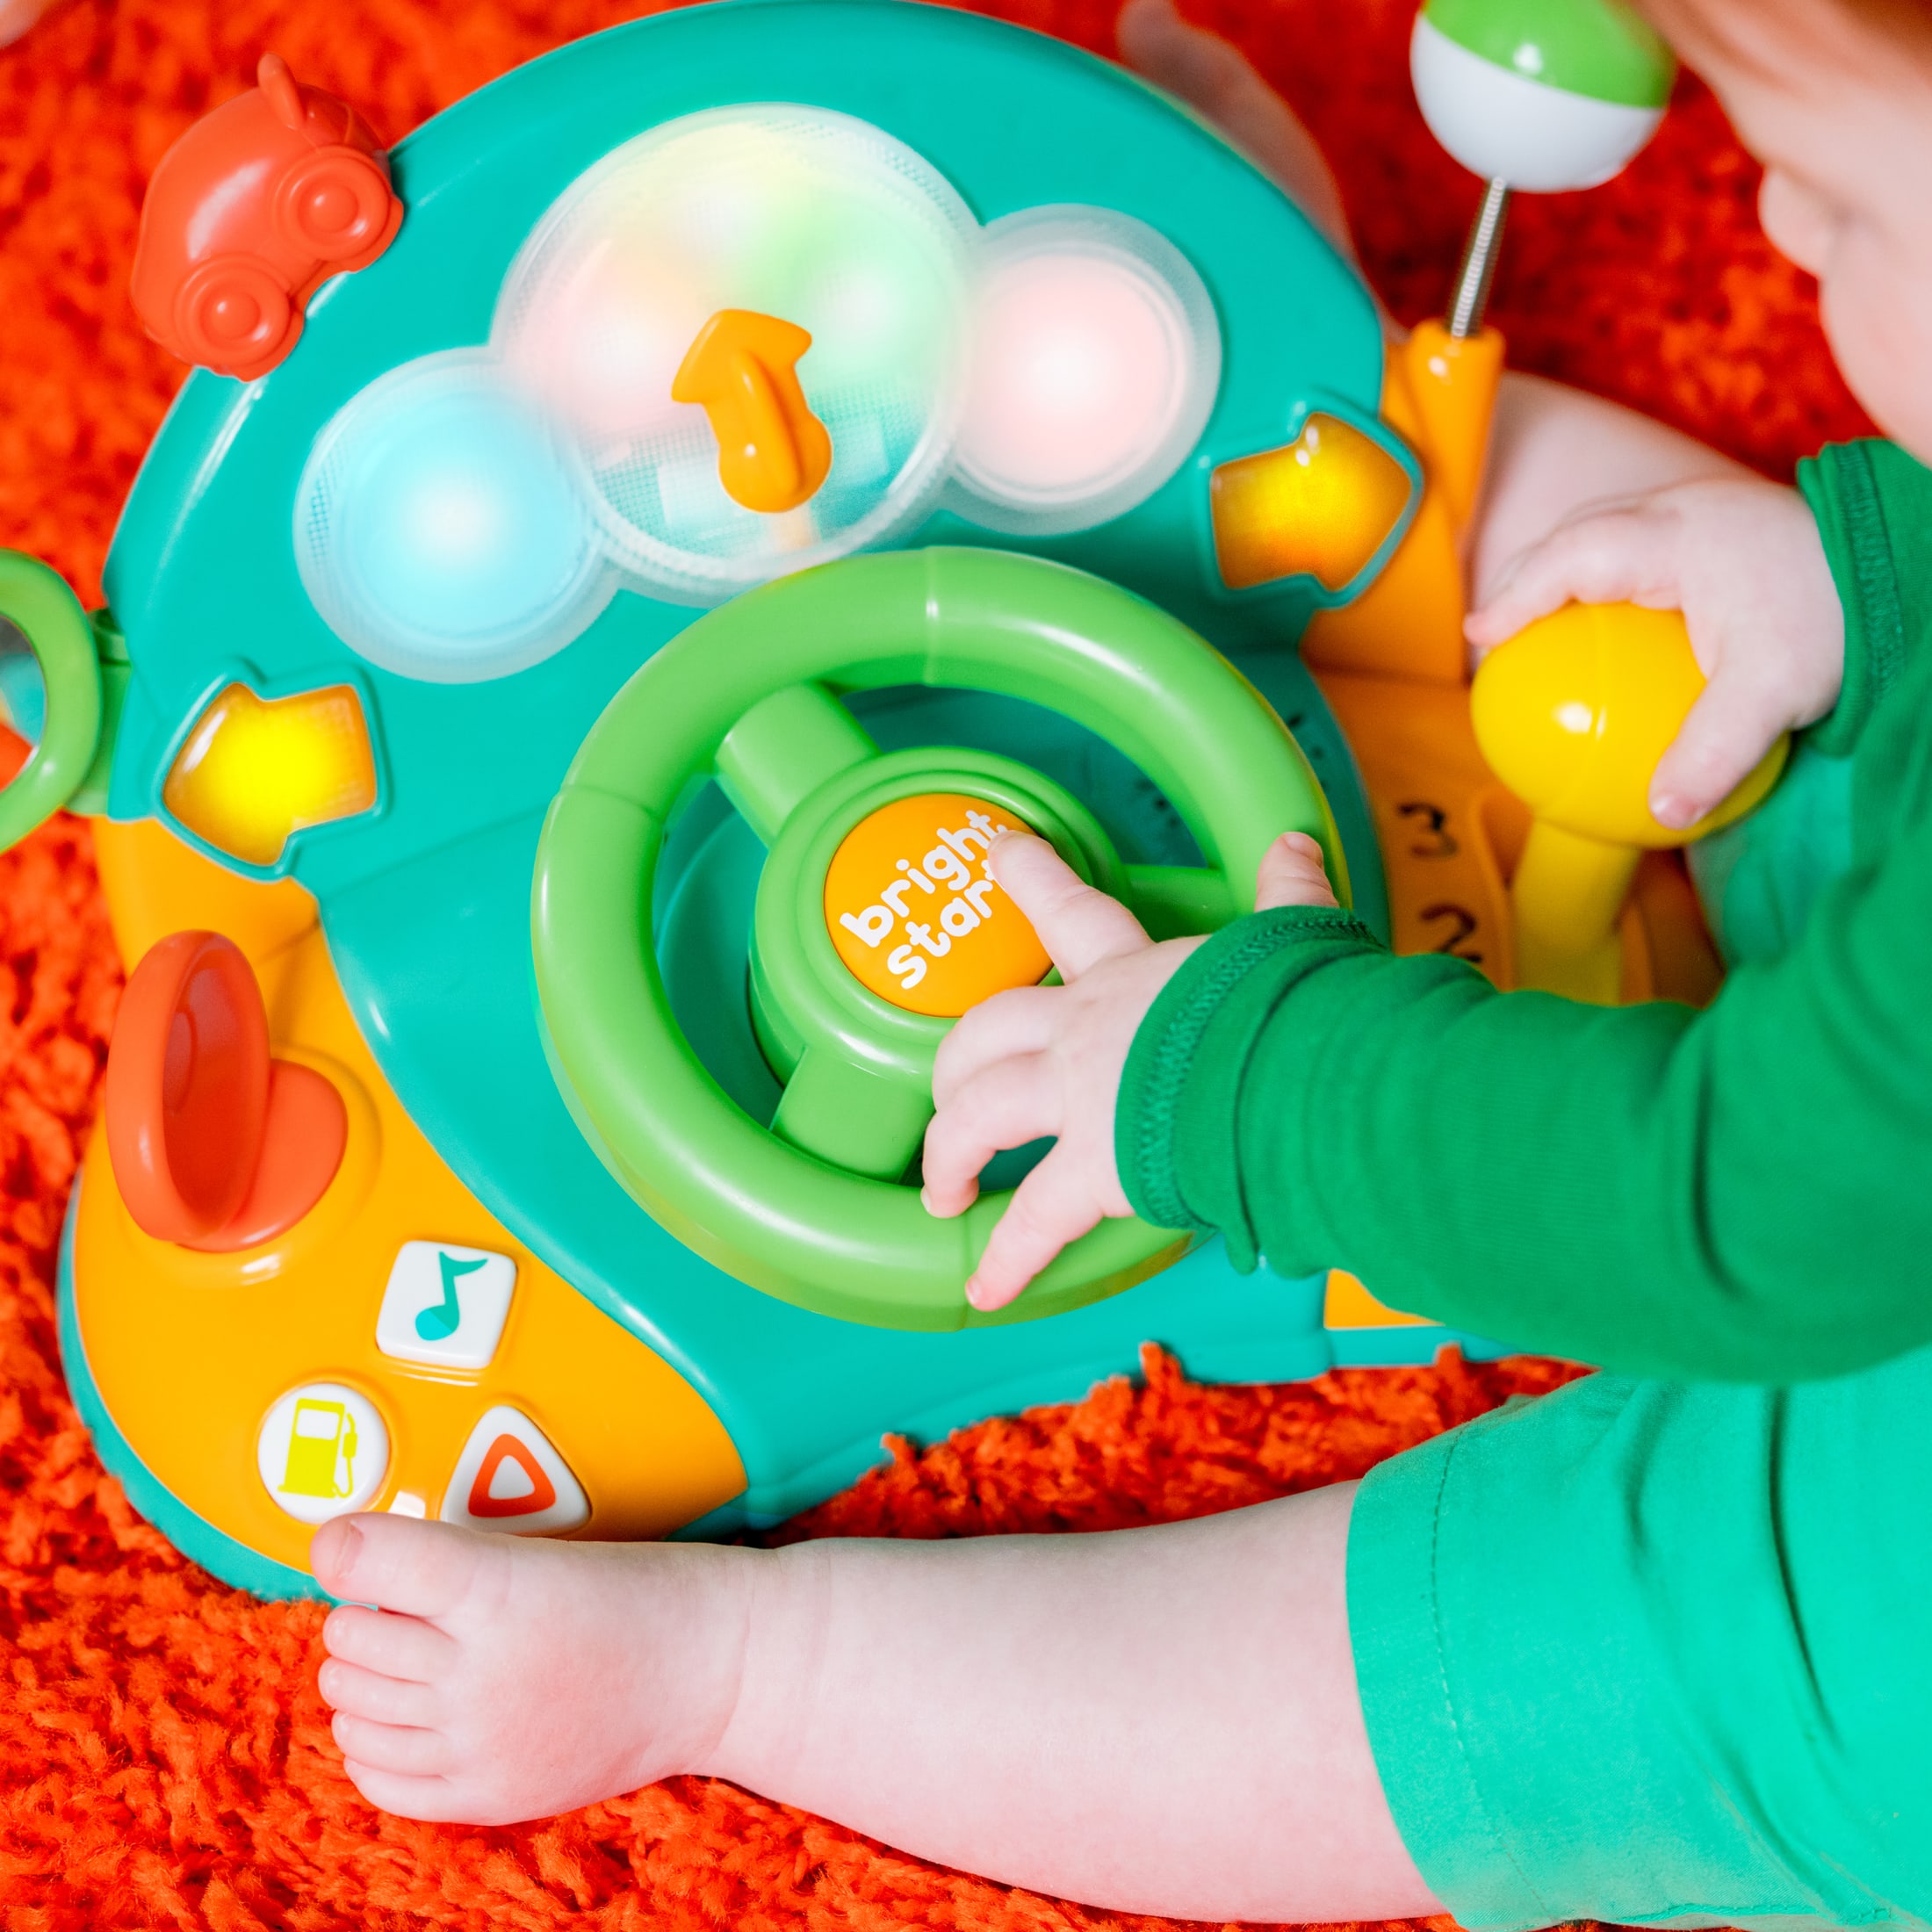 Bright Starts Lights & Colors Driver Electronic Learning Toy with Melodies, Ages 6 Months + - image 5 of 18